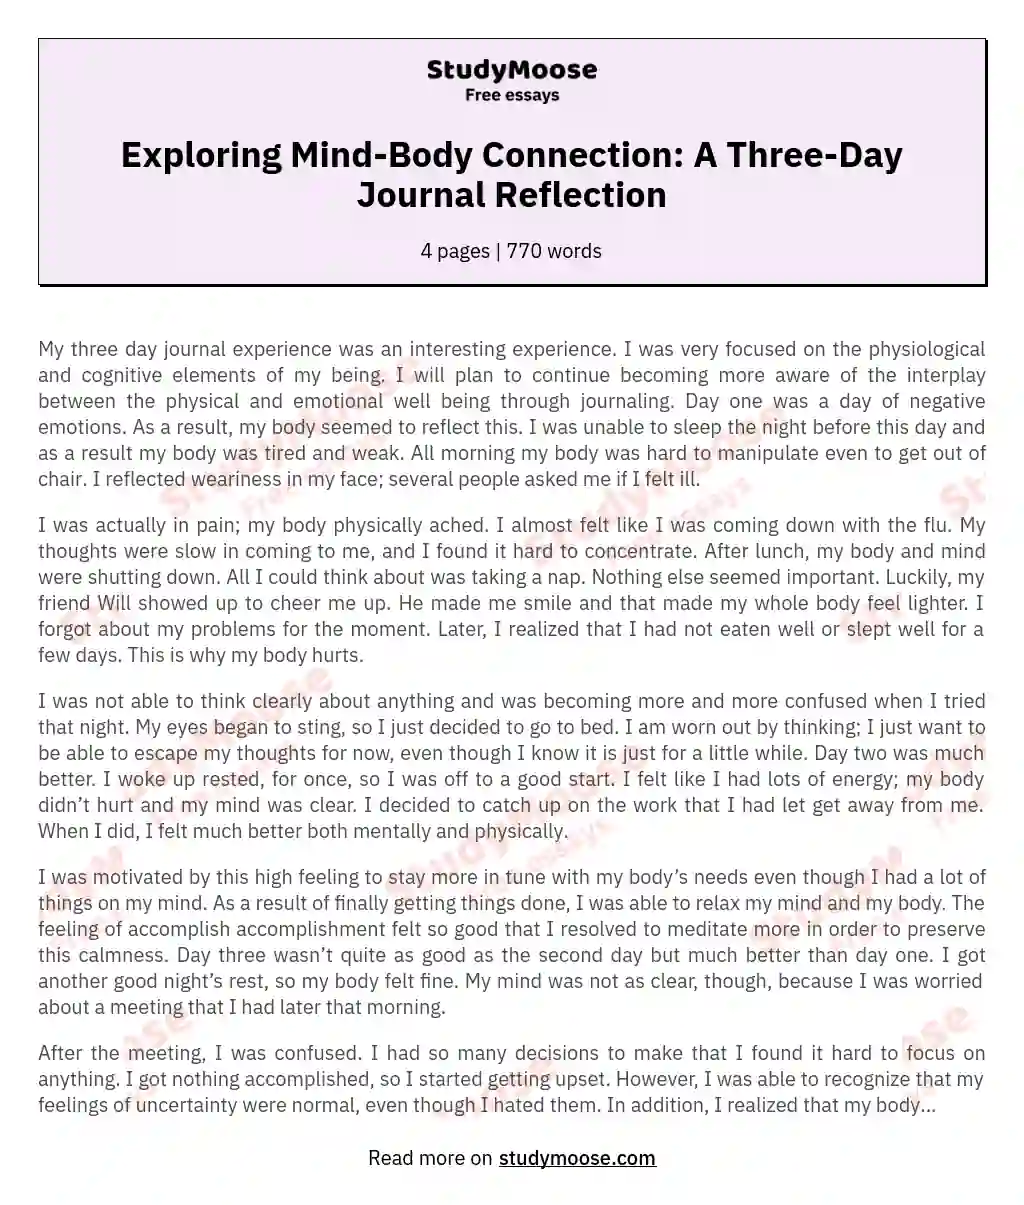 Exploring Mind-Body Connection: A Three-Day Journal Reflection essay